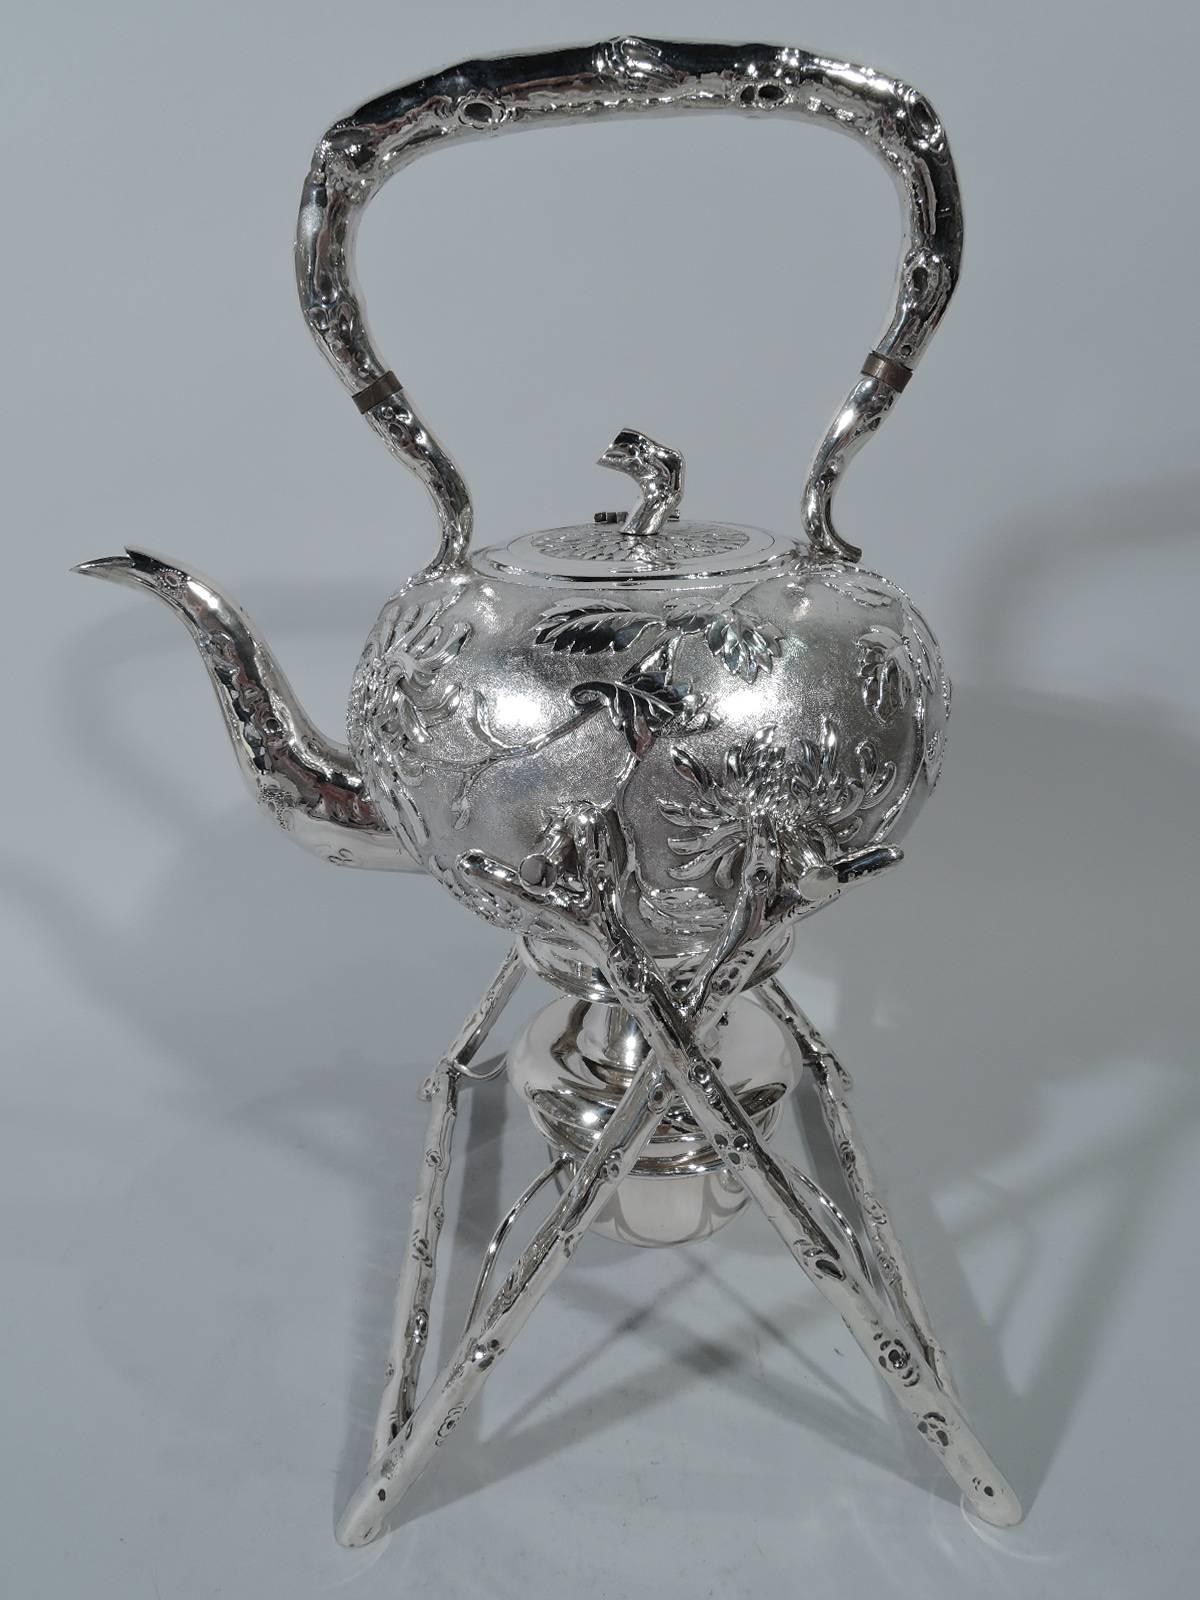 Chinese export silver tea set with modish chrysanthemum motif, circa 1900. This set comprises hot water kettle on stand, teapot, creamer, and sugar. Each: Globular with flowers on stippled ground. Kettle and teapot have S-form spout. Creamer has